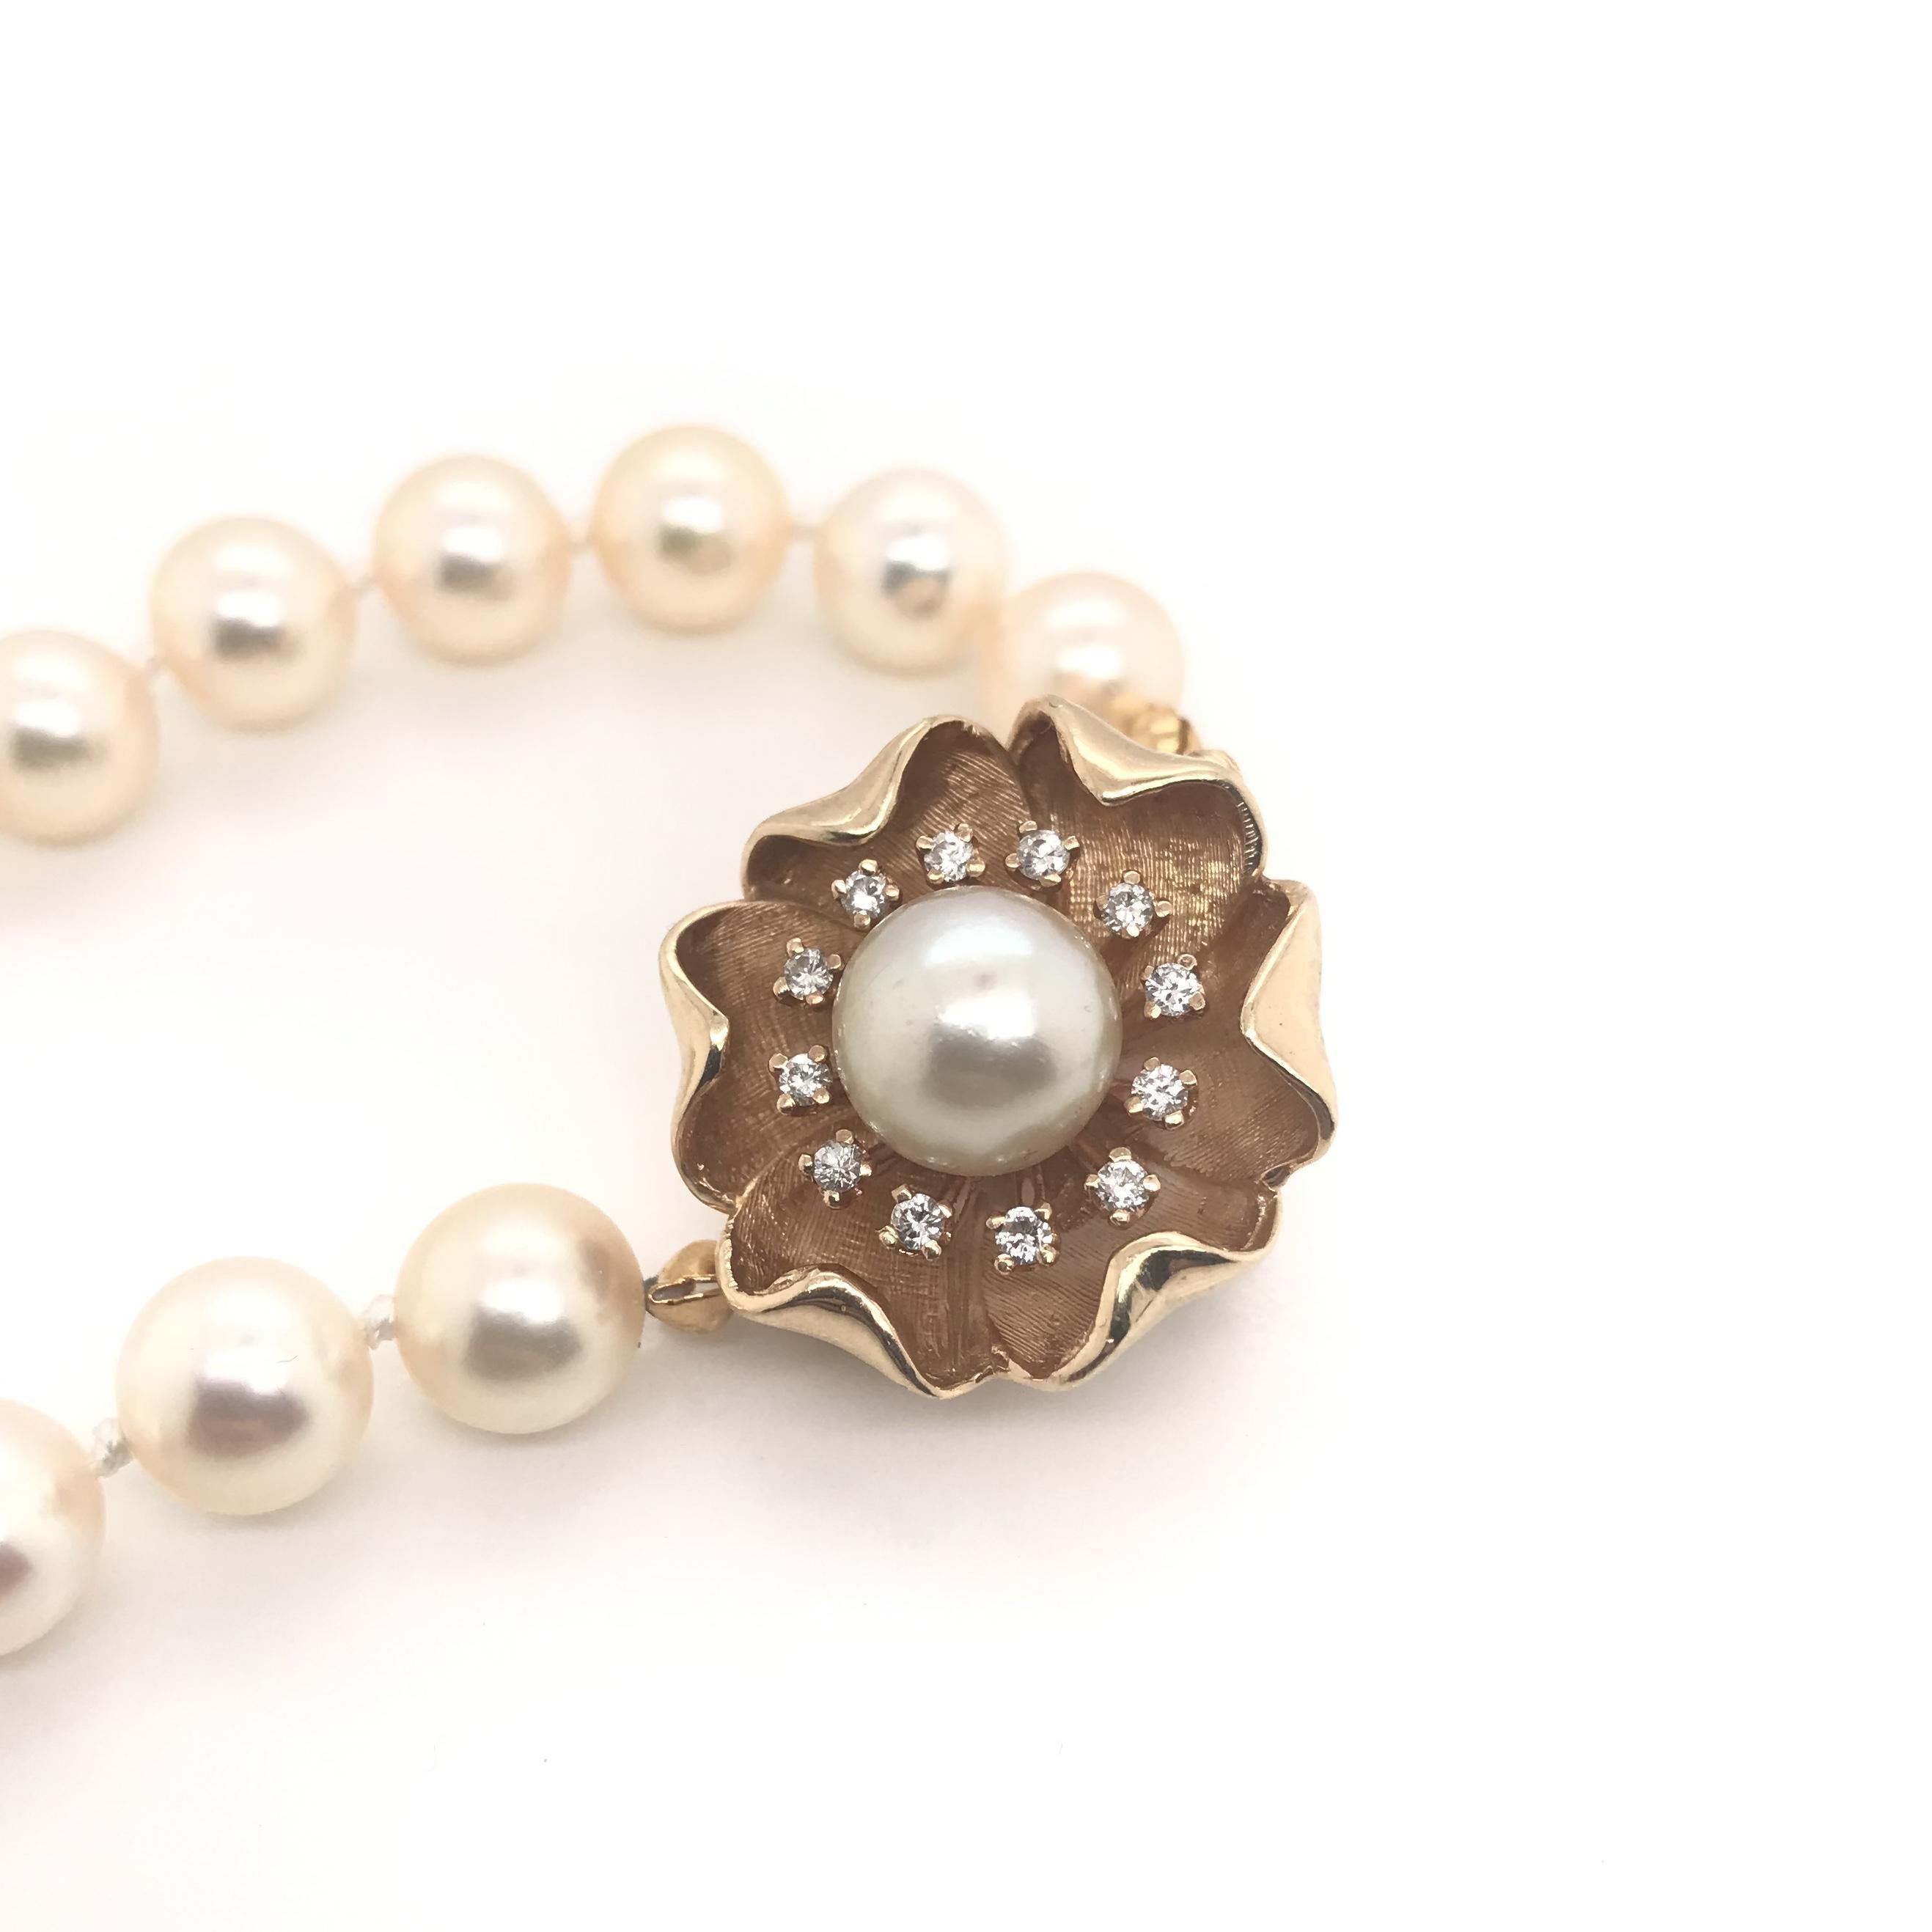 Round Cut Vintage Mid Century 7.5 Mm Pearl Necklace With Floral Diamond Clasp For Sale